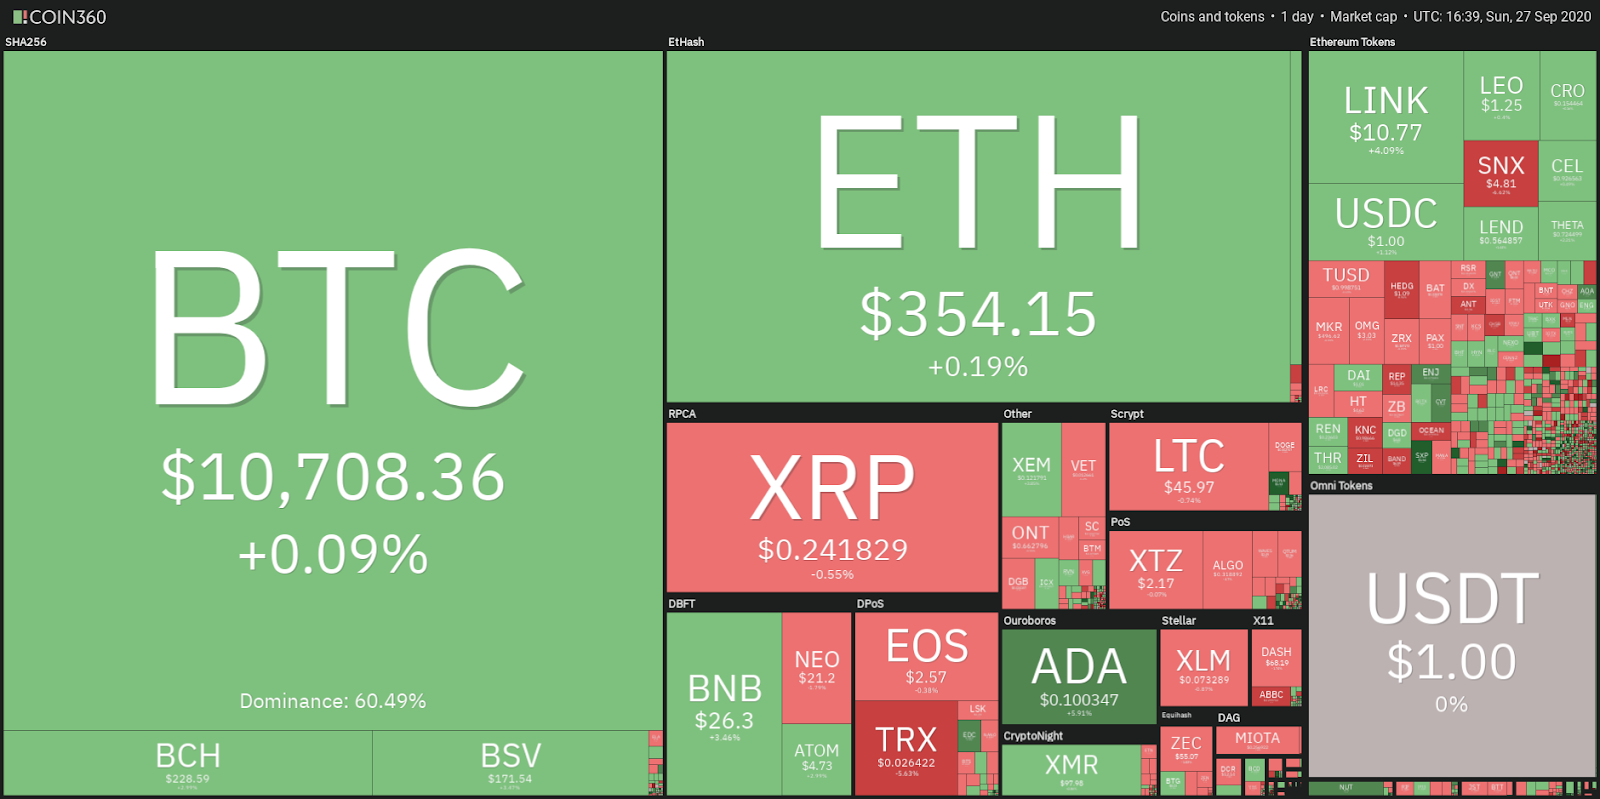 Crypto market data daily view. Source: Coin360